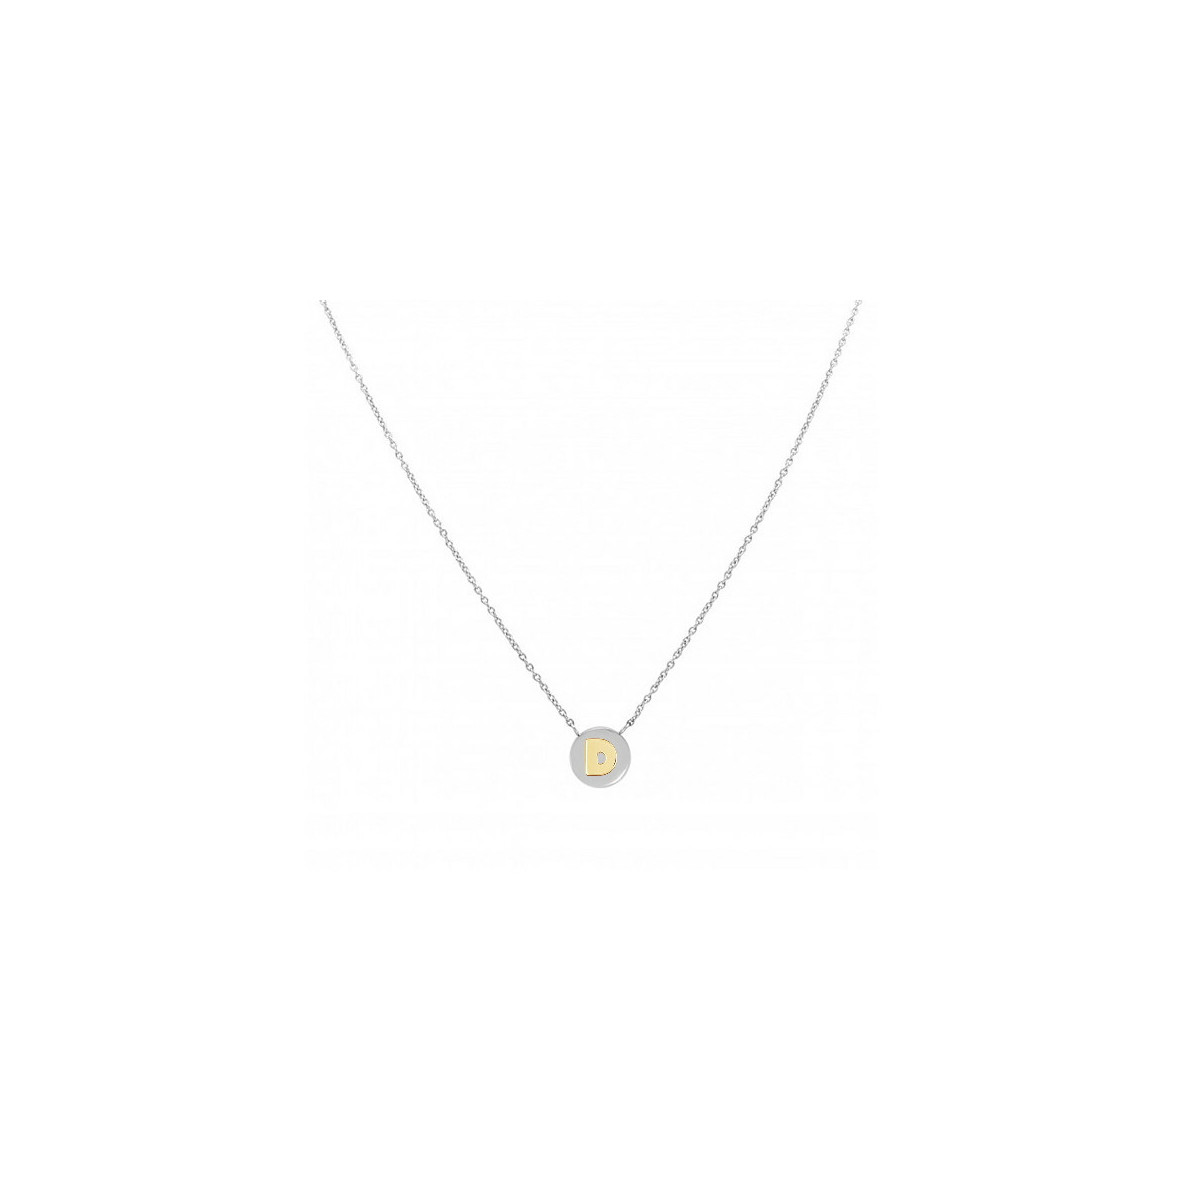 NECKLACE WITH THE LETTER D IN GOLD